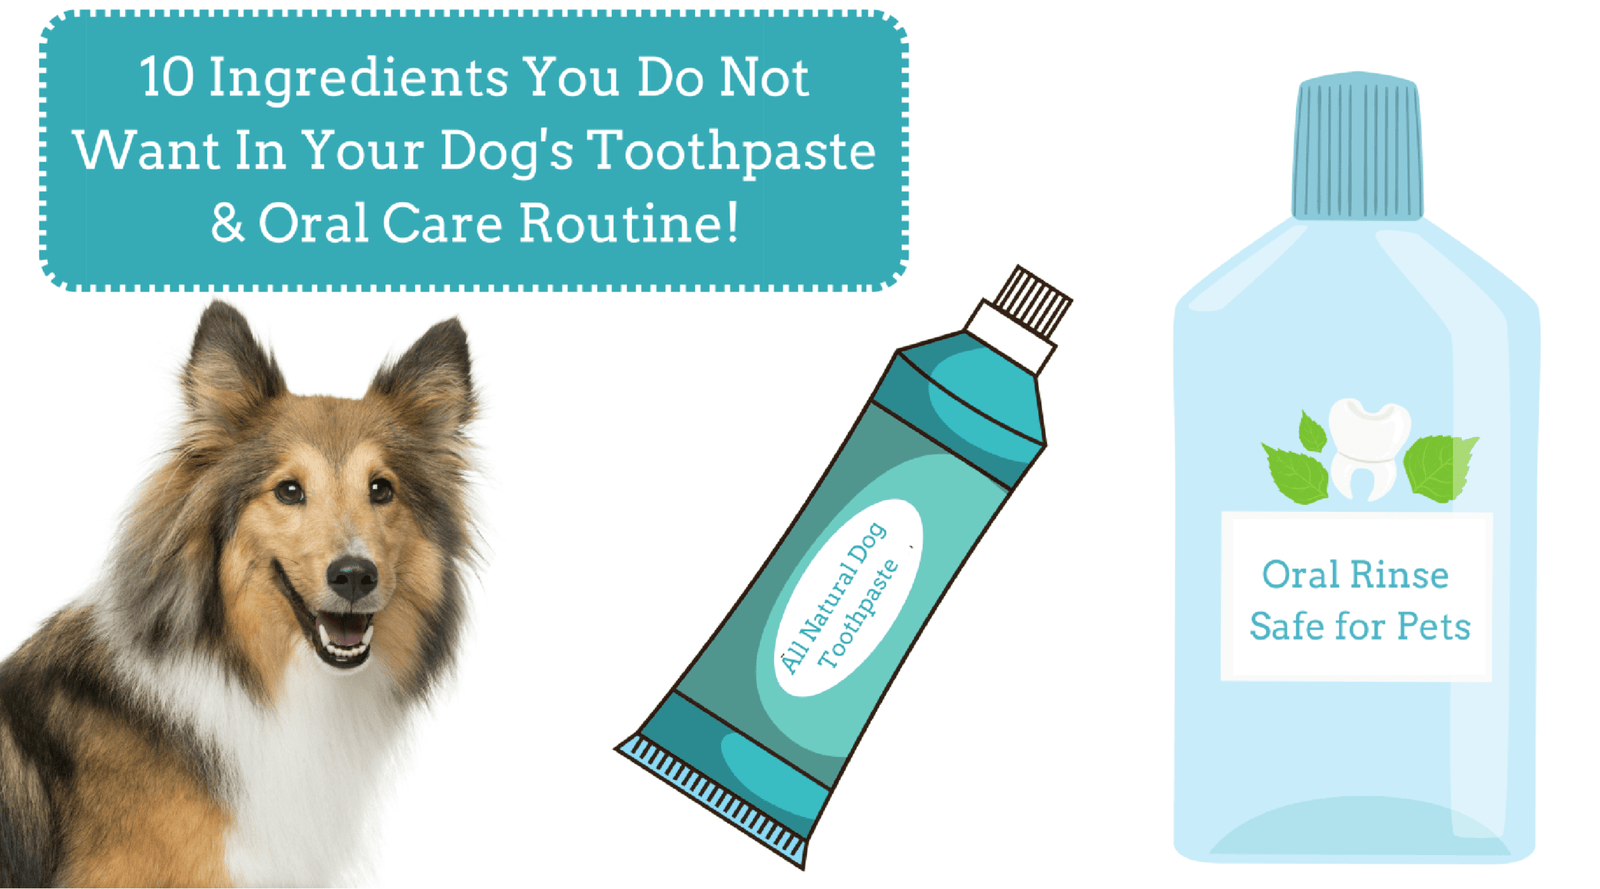 10 Ingredients You Don't Want in Your Dog's Toothpaste or Oral Care Routine